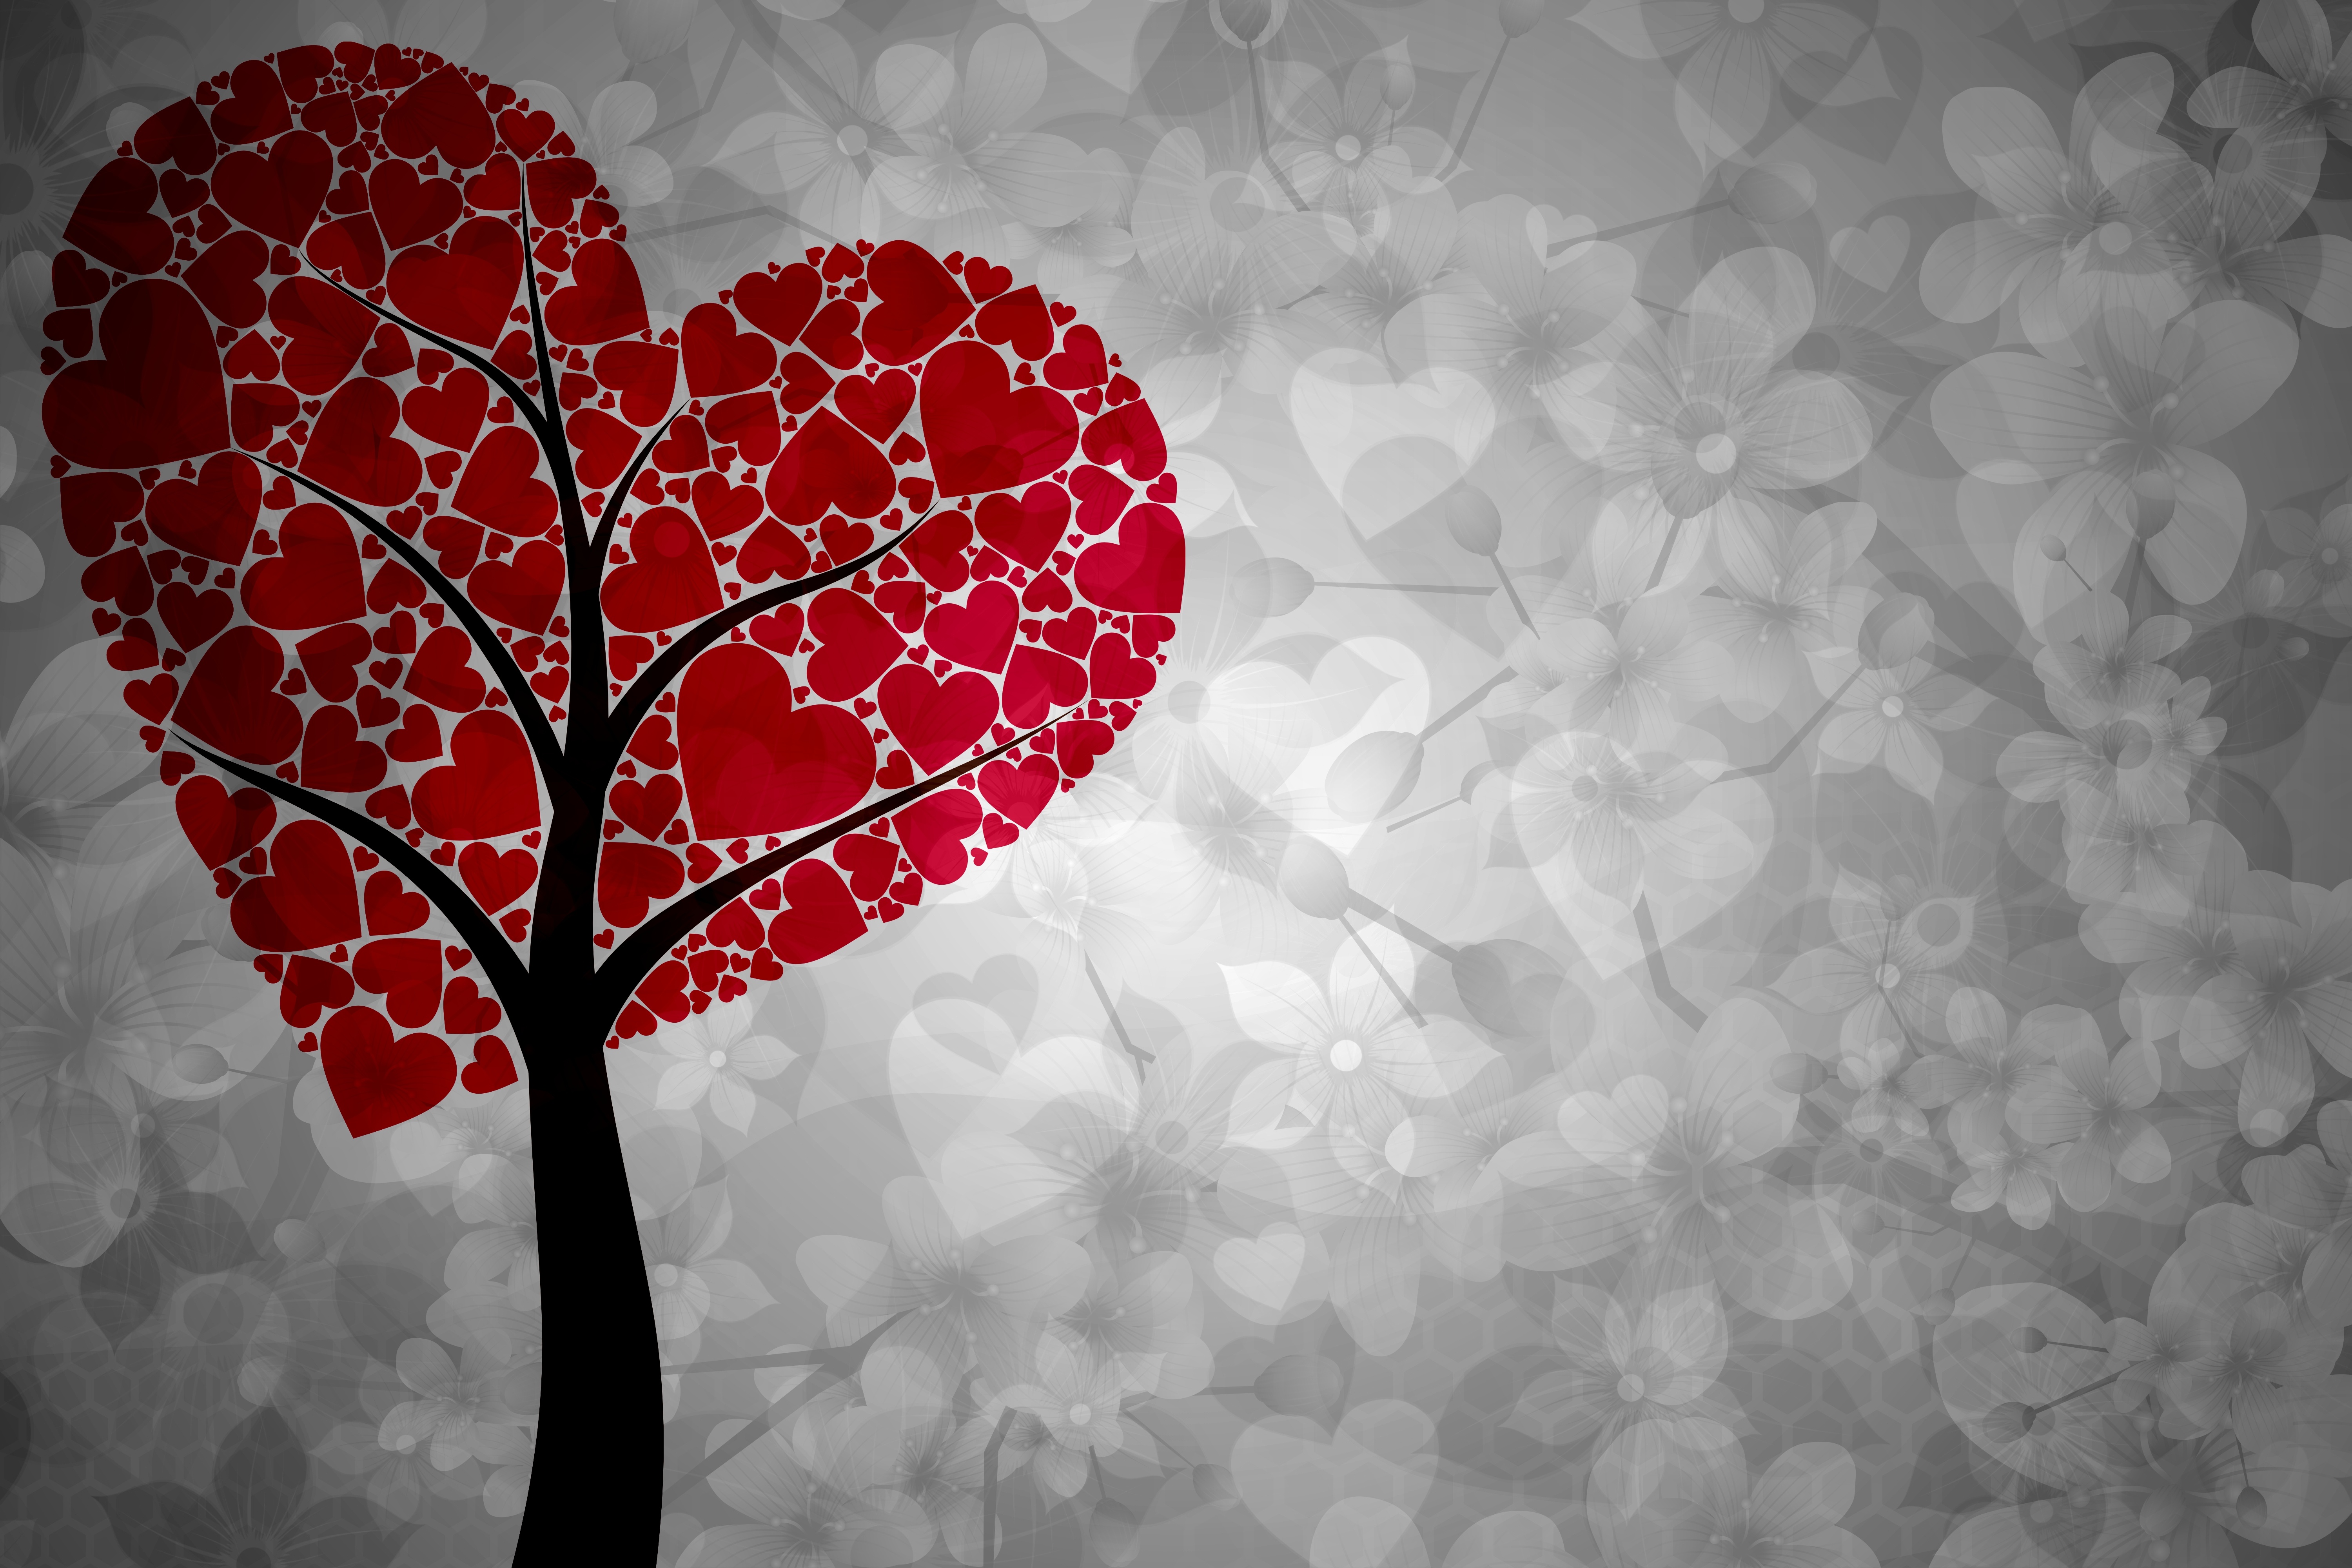 540+ Artistic Heart HD Wallpapers and Backgrounds